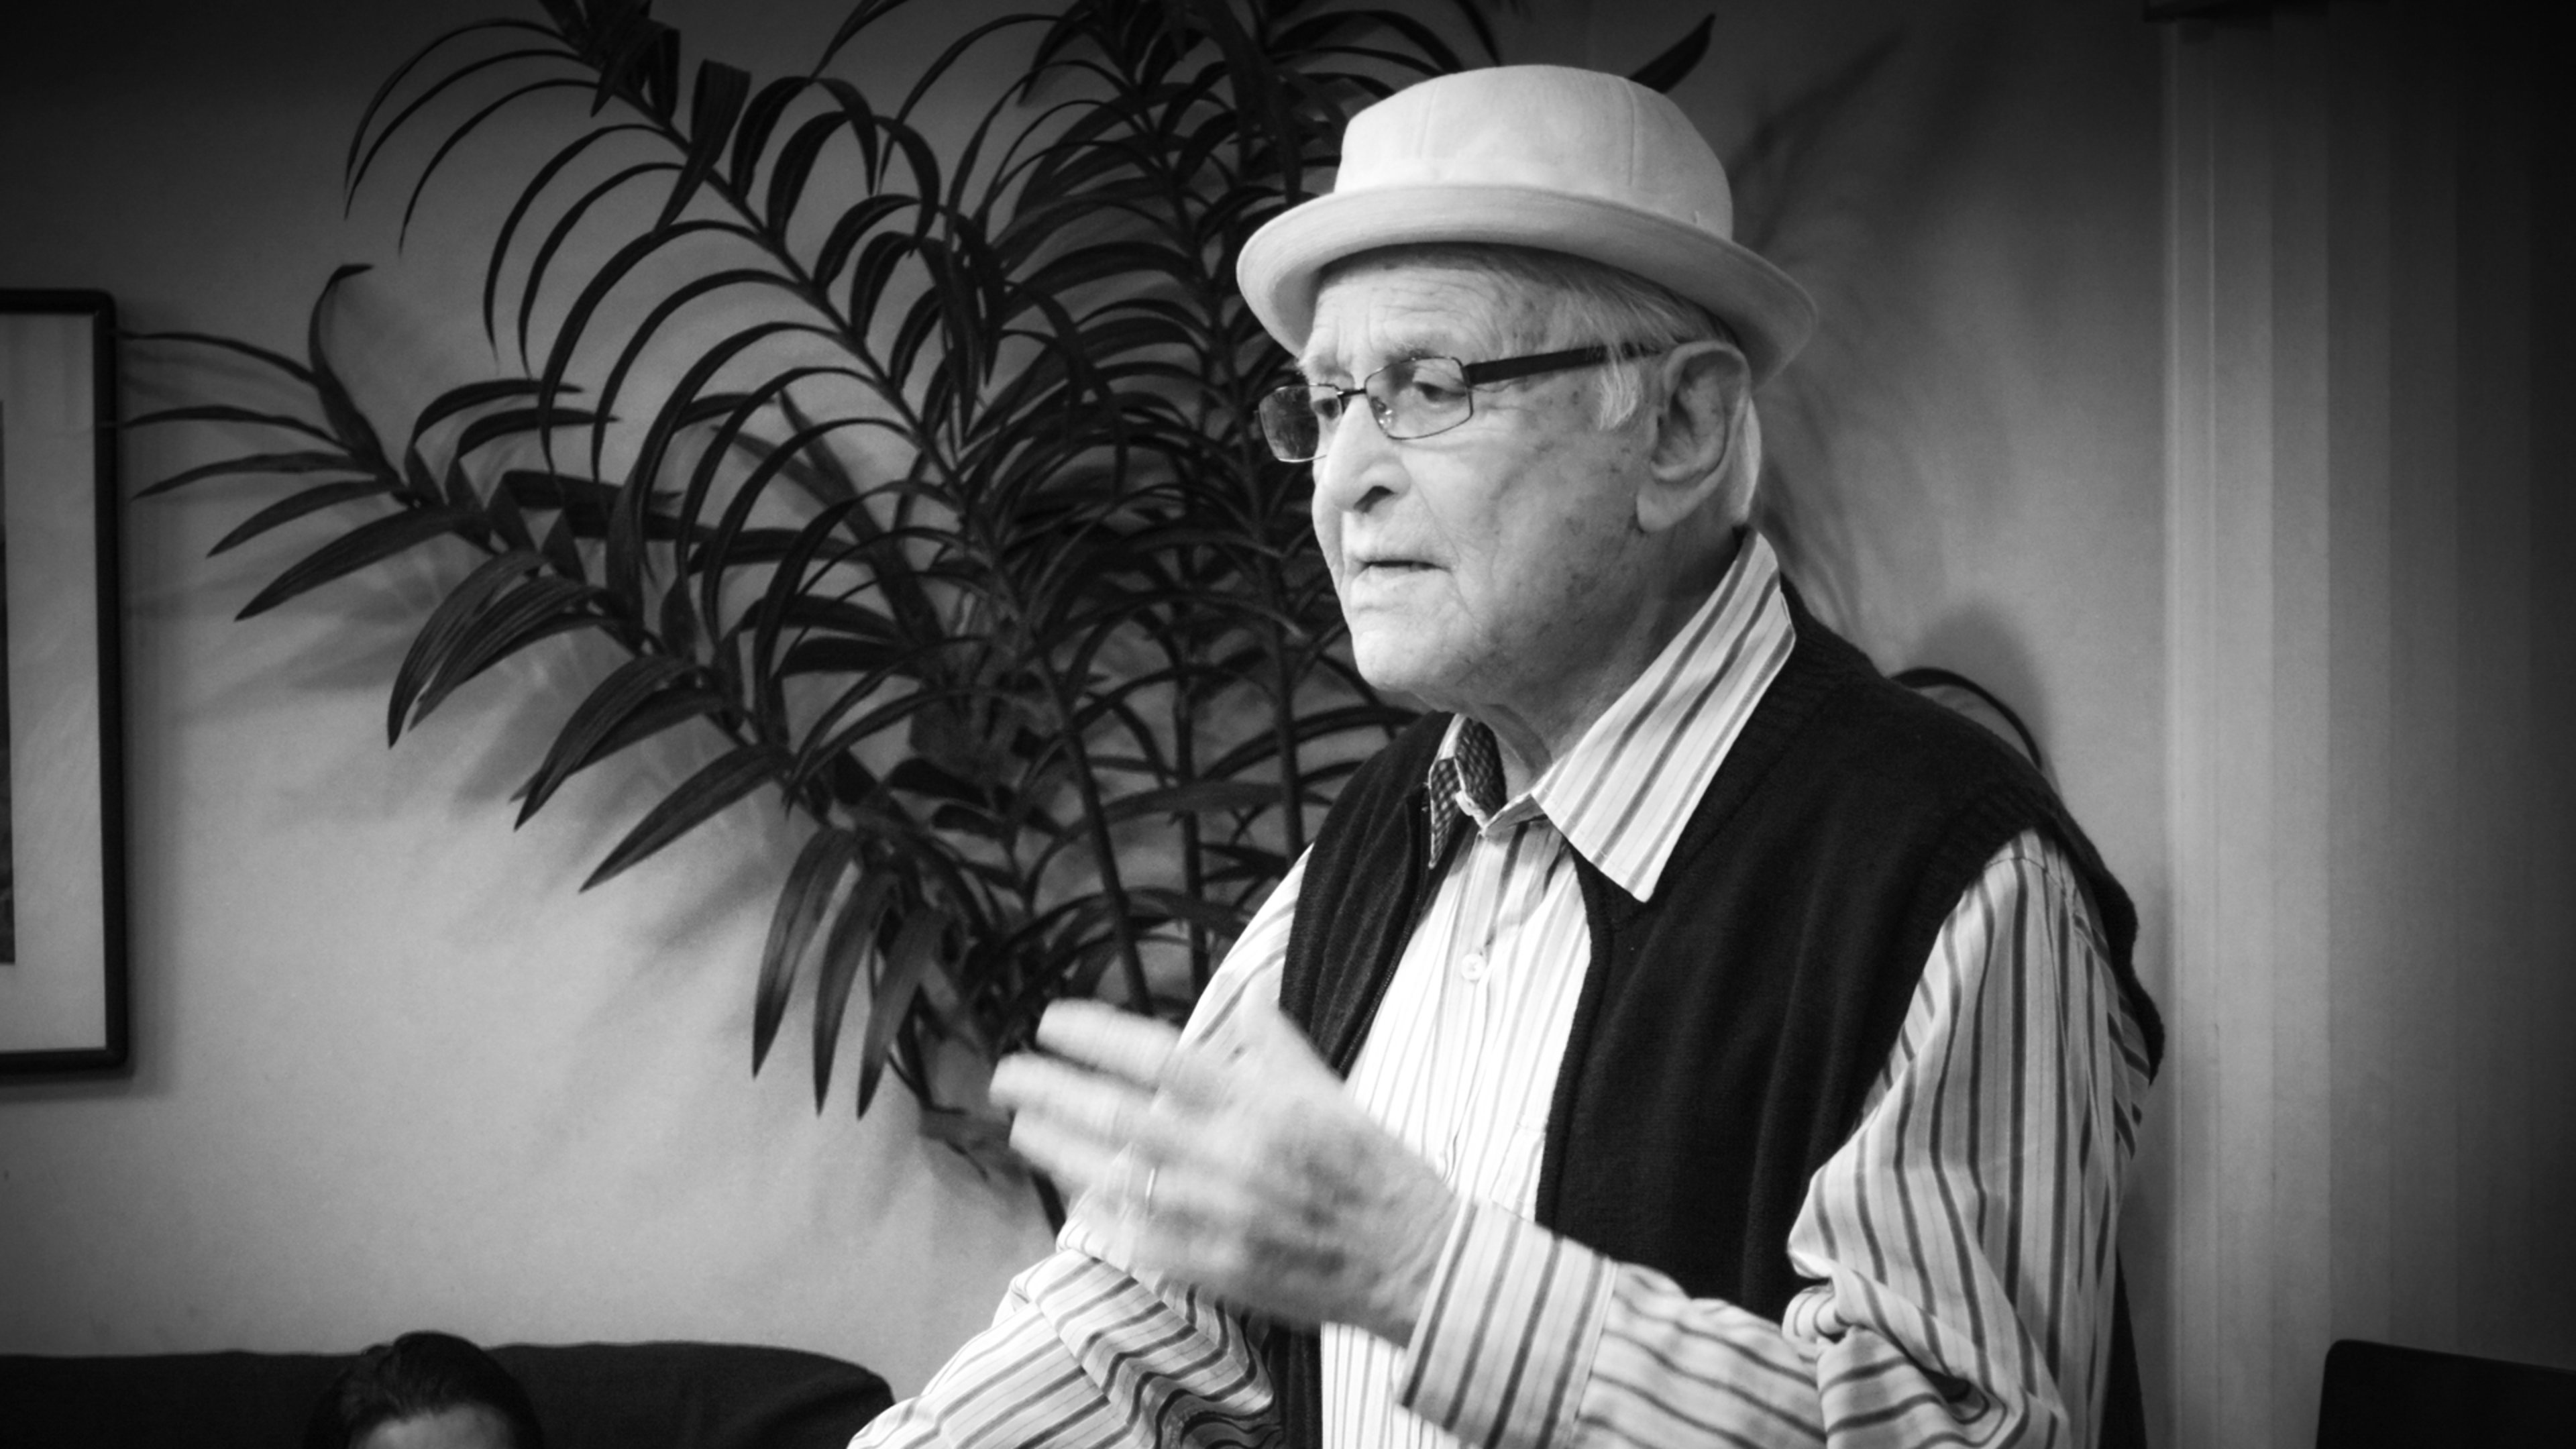 LISTEN: TV Legend Norman Lear Thinks “Maximizing Shareholder Value” Is The “Central Disease Of Our Time”